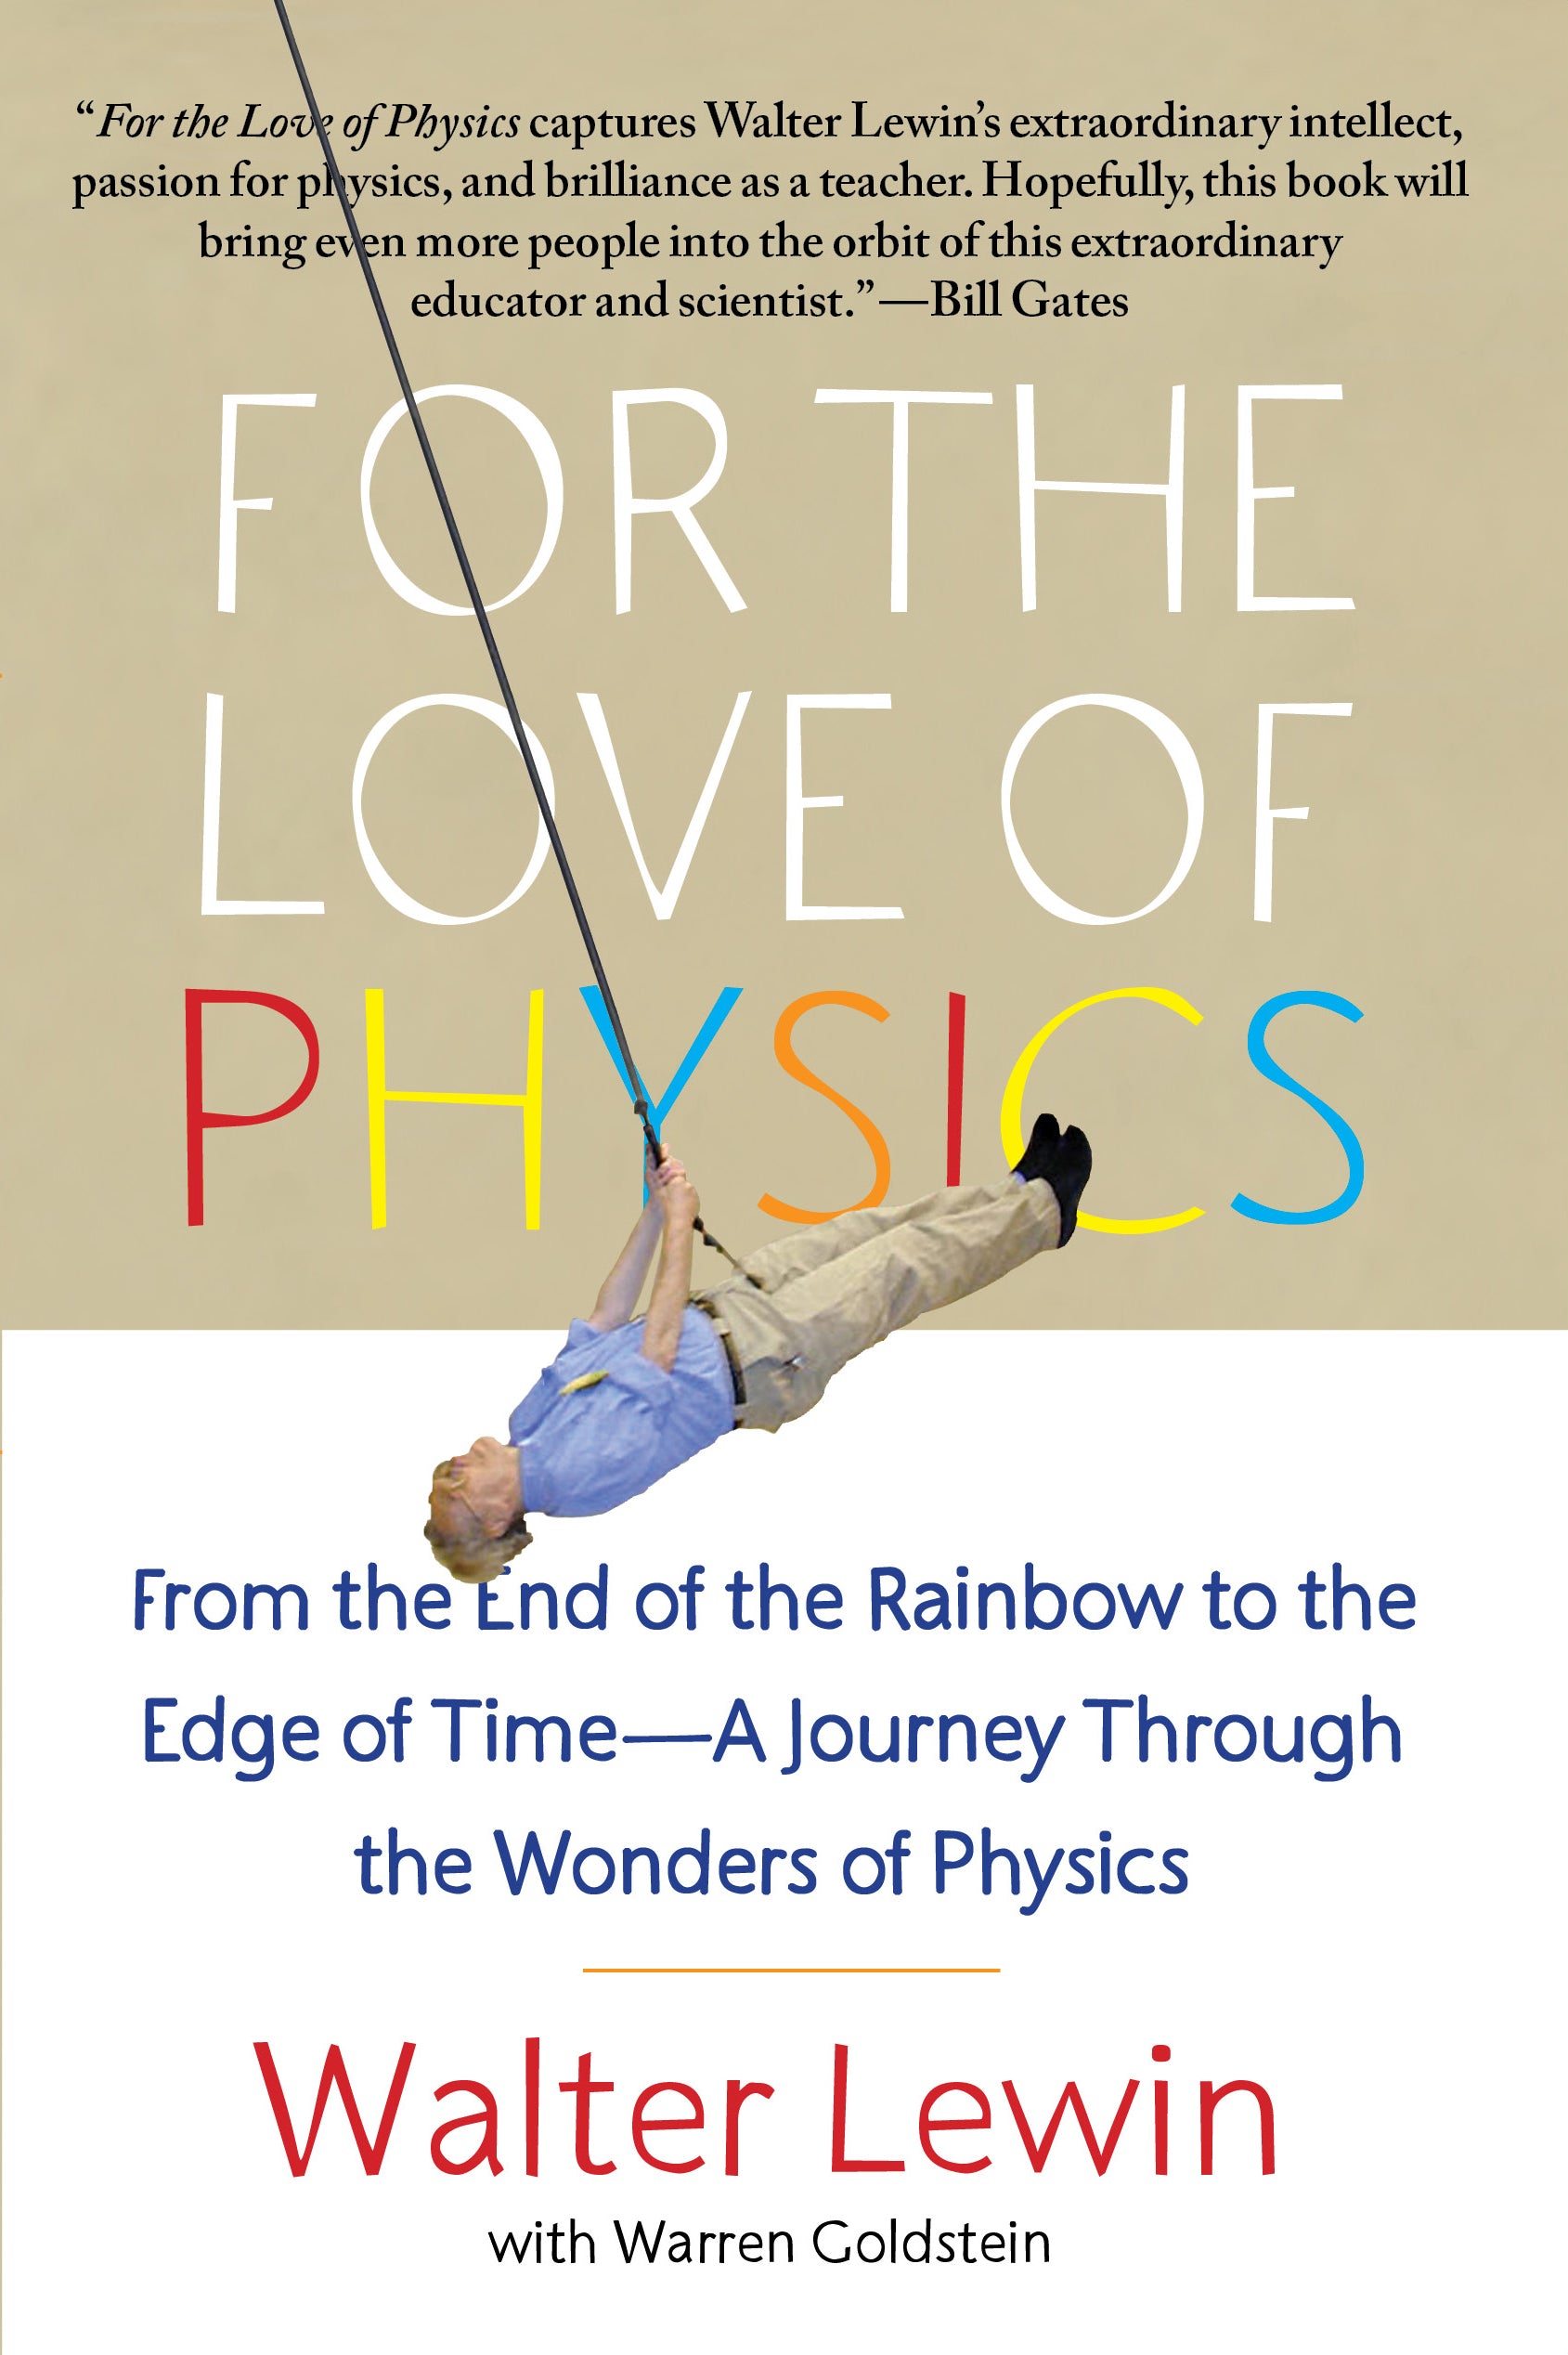 For the Love of Physics From the End of the Rainbow to the Edge of Time - A Journey Through the Wonders of Physics